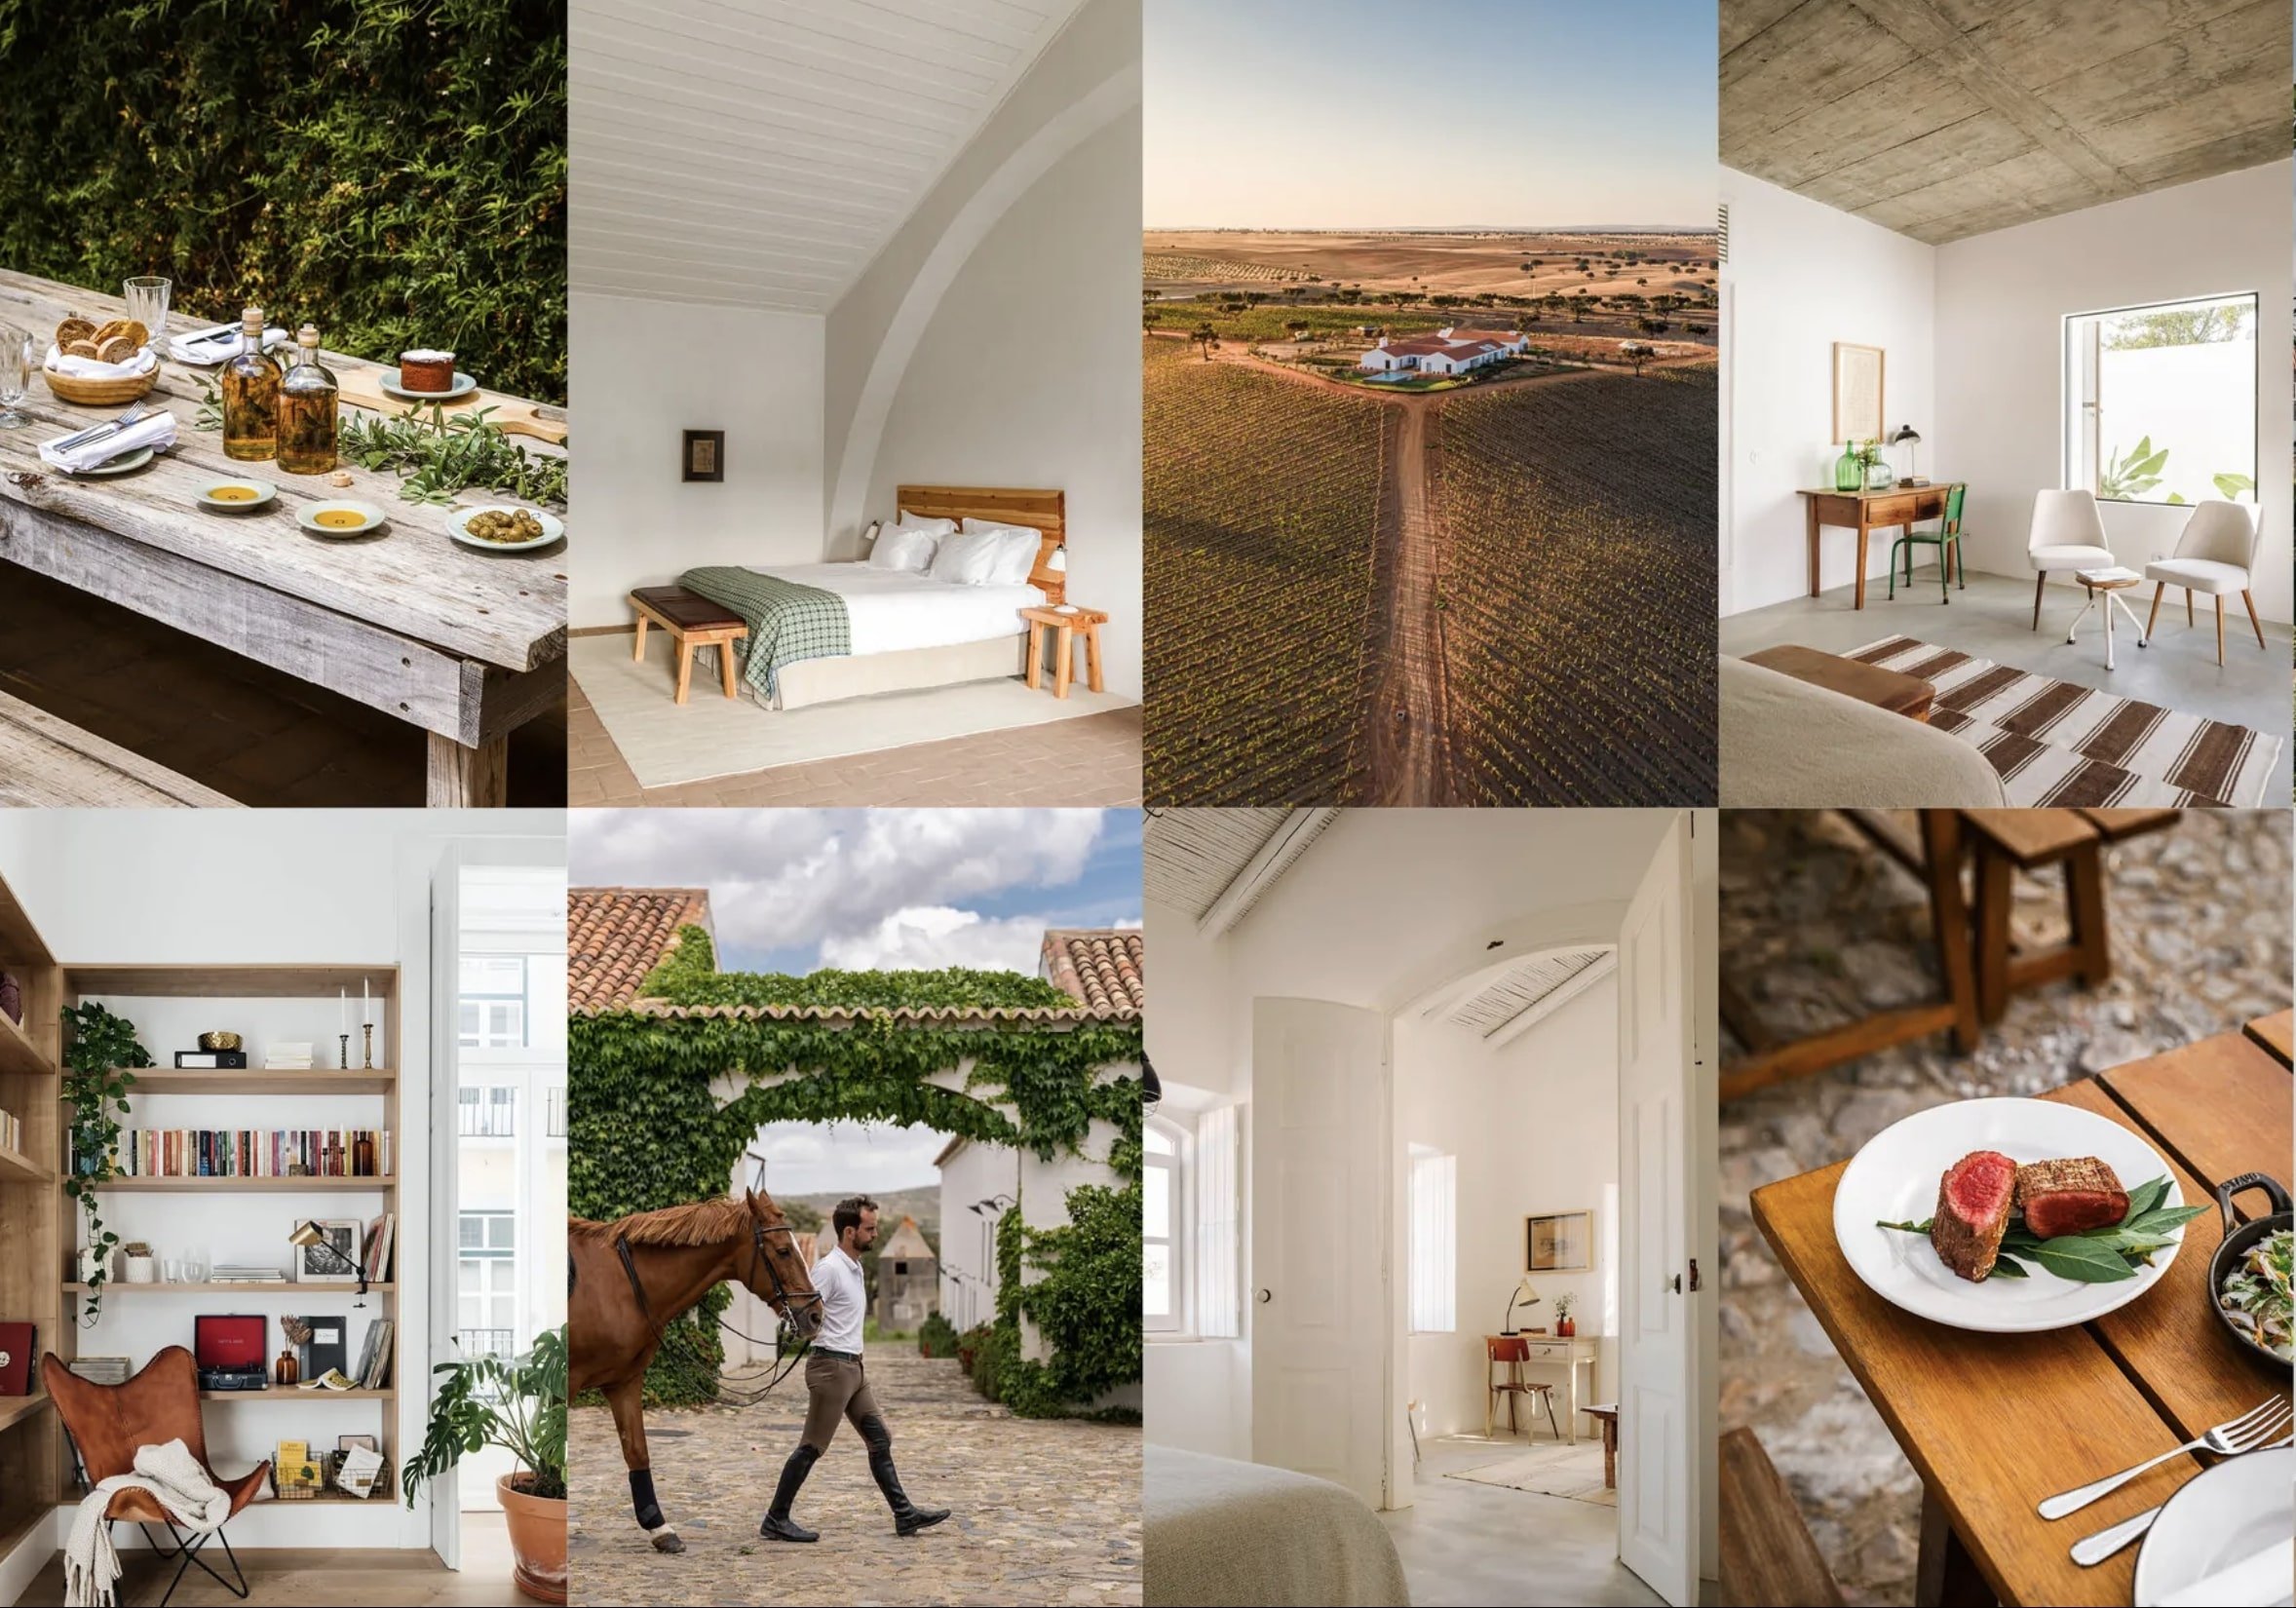 Condé Nast Traveler: 9 Hotels in Portugal With Fascinating Past Lives